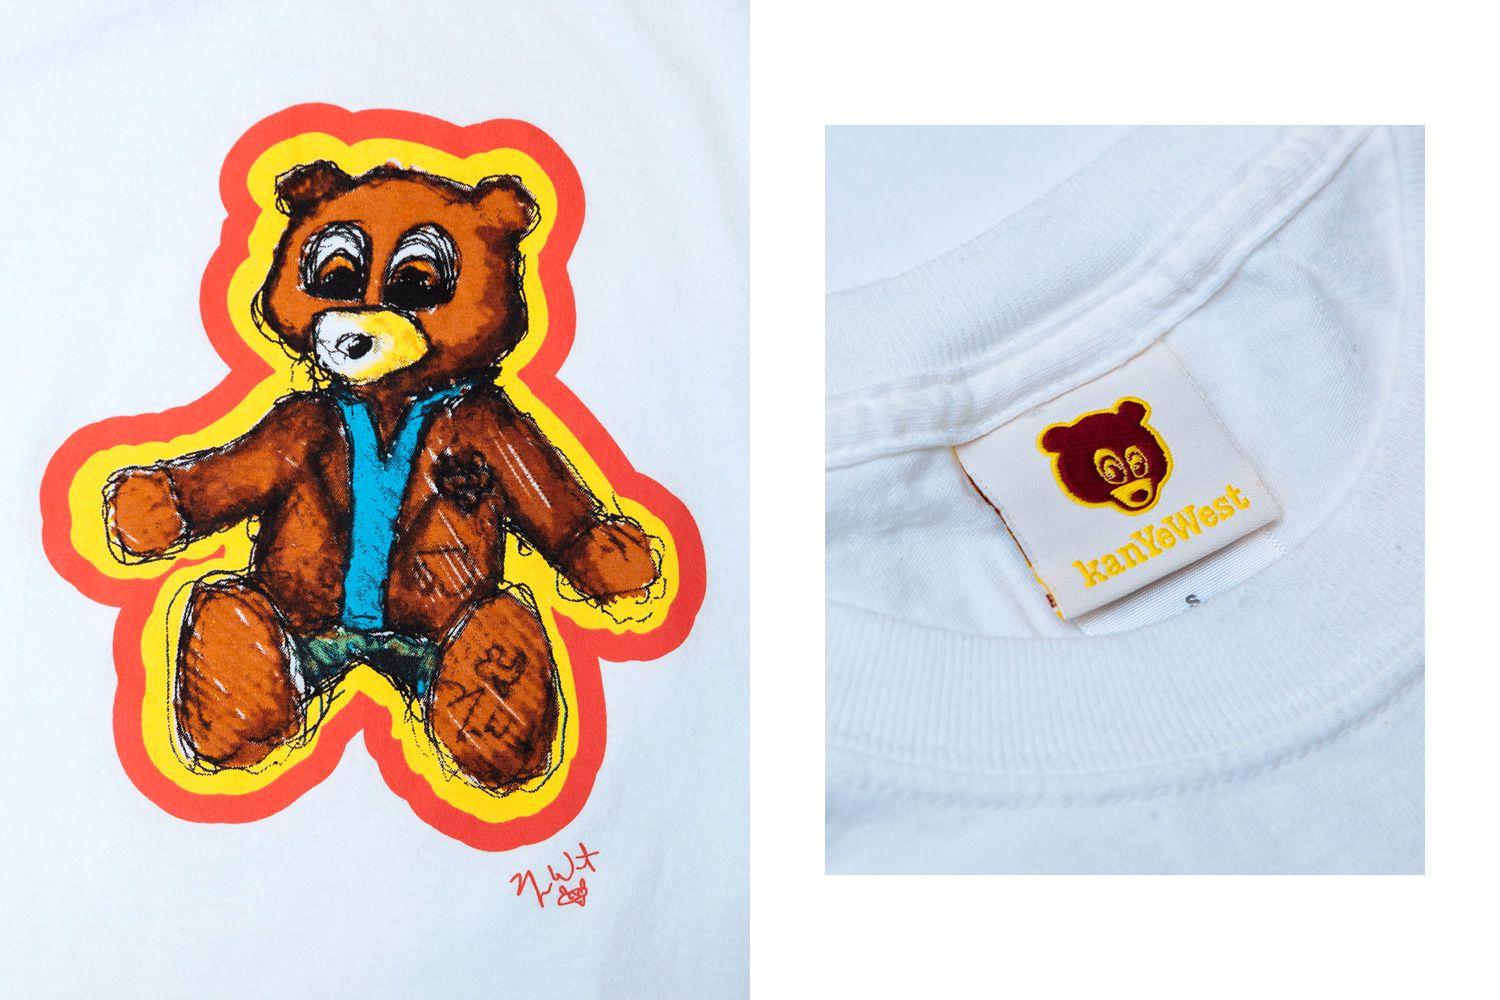 Yeezy Bear Logo - Check Out This Super Rare Kanye West Merchandise | Highsnobiety